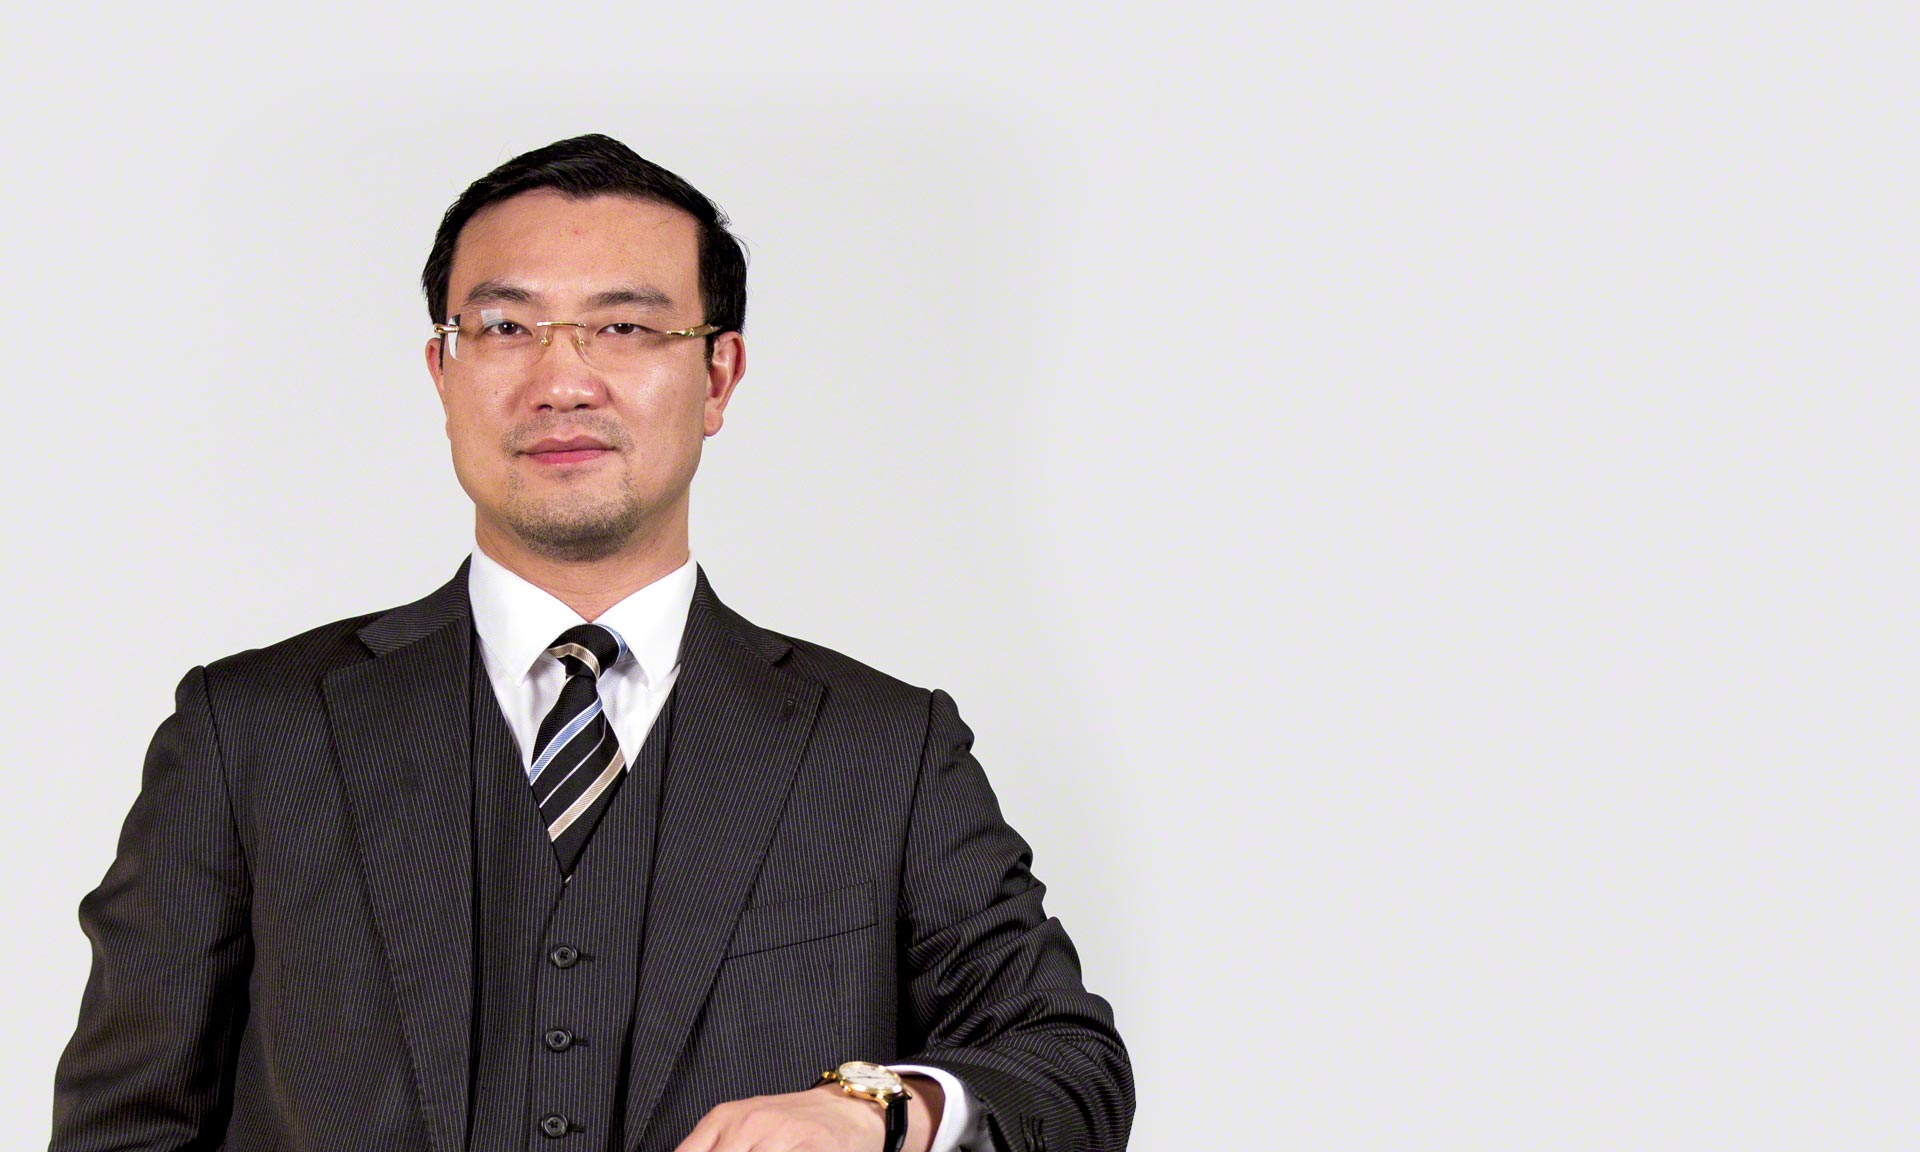 Interview with Yeming Gong (Emlyon Business School)